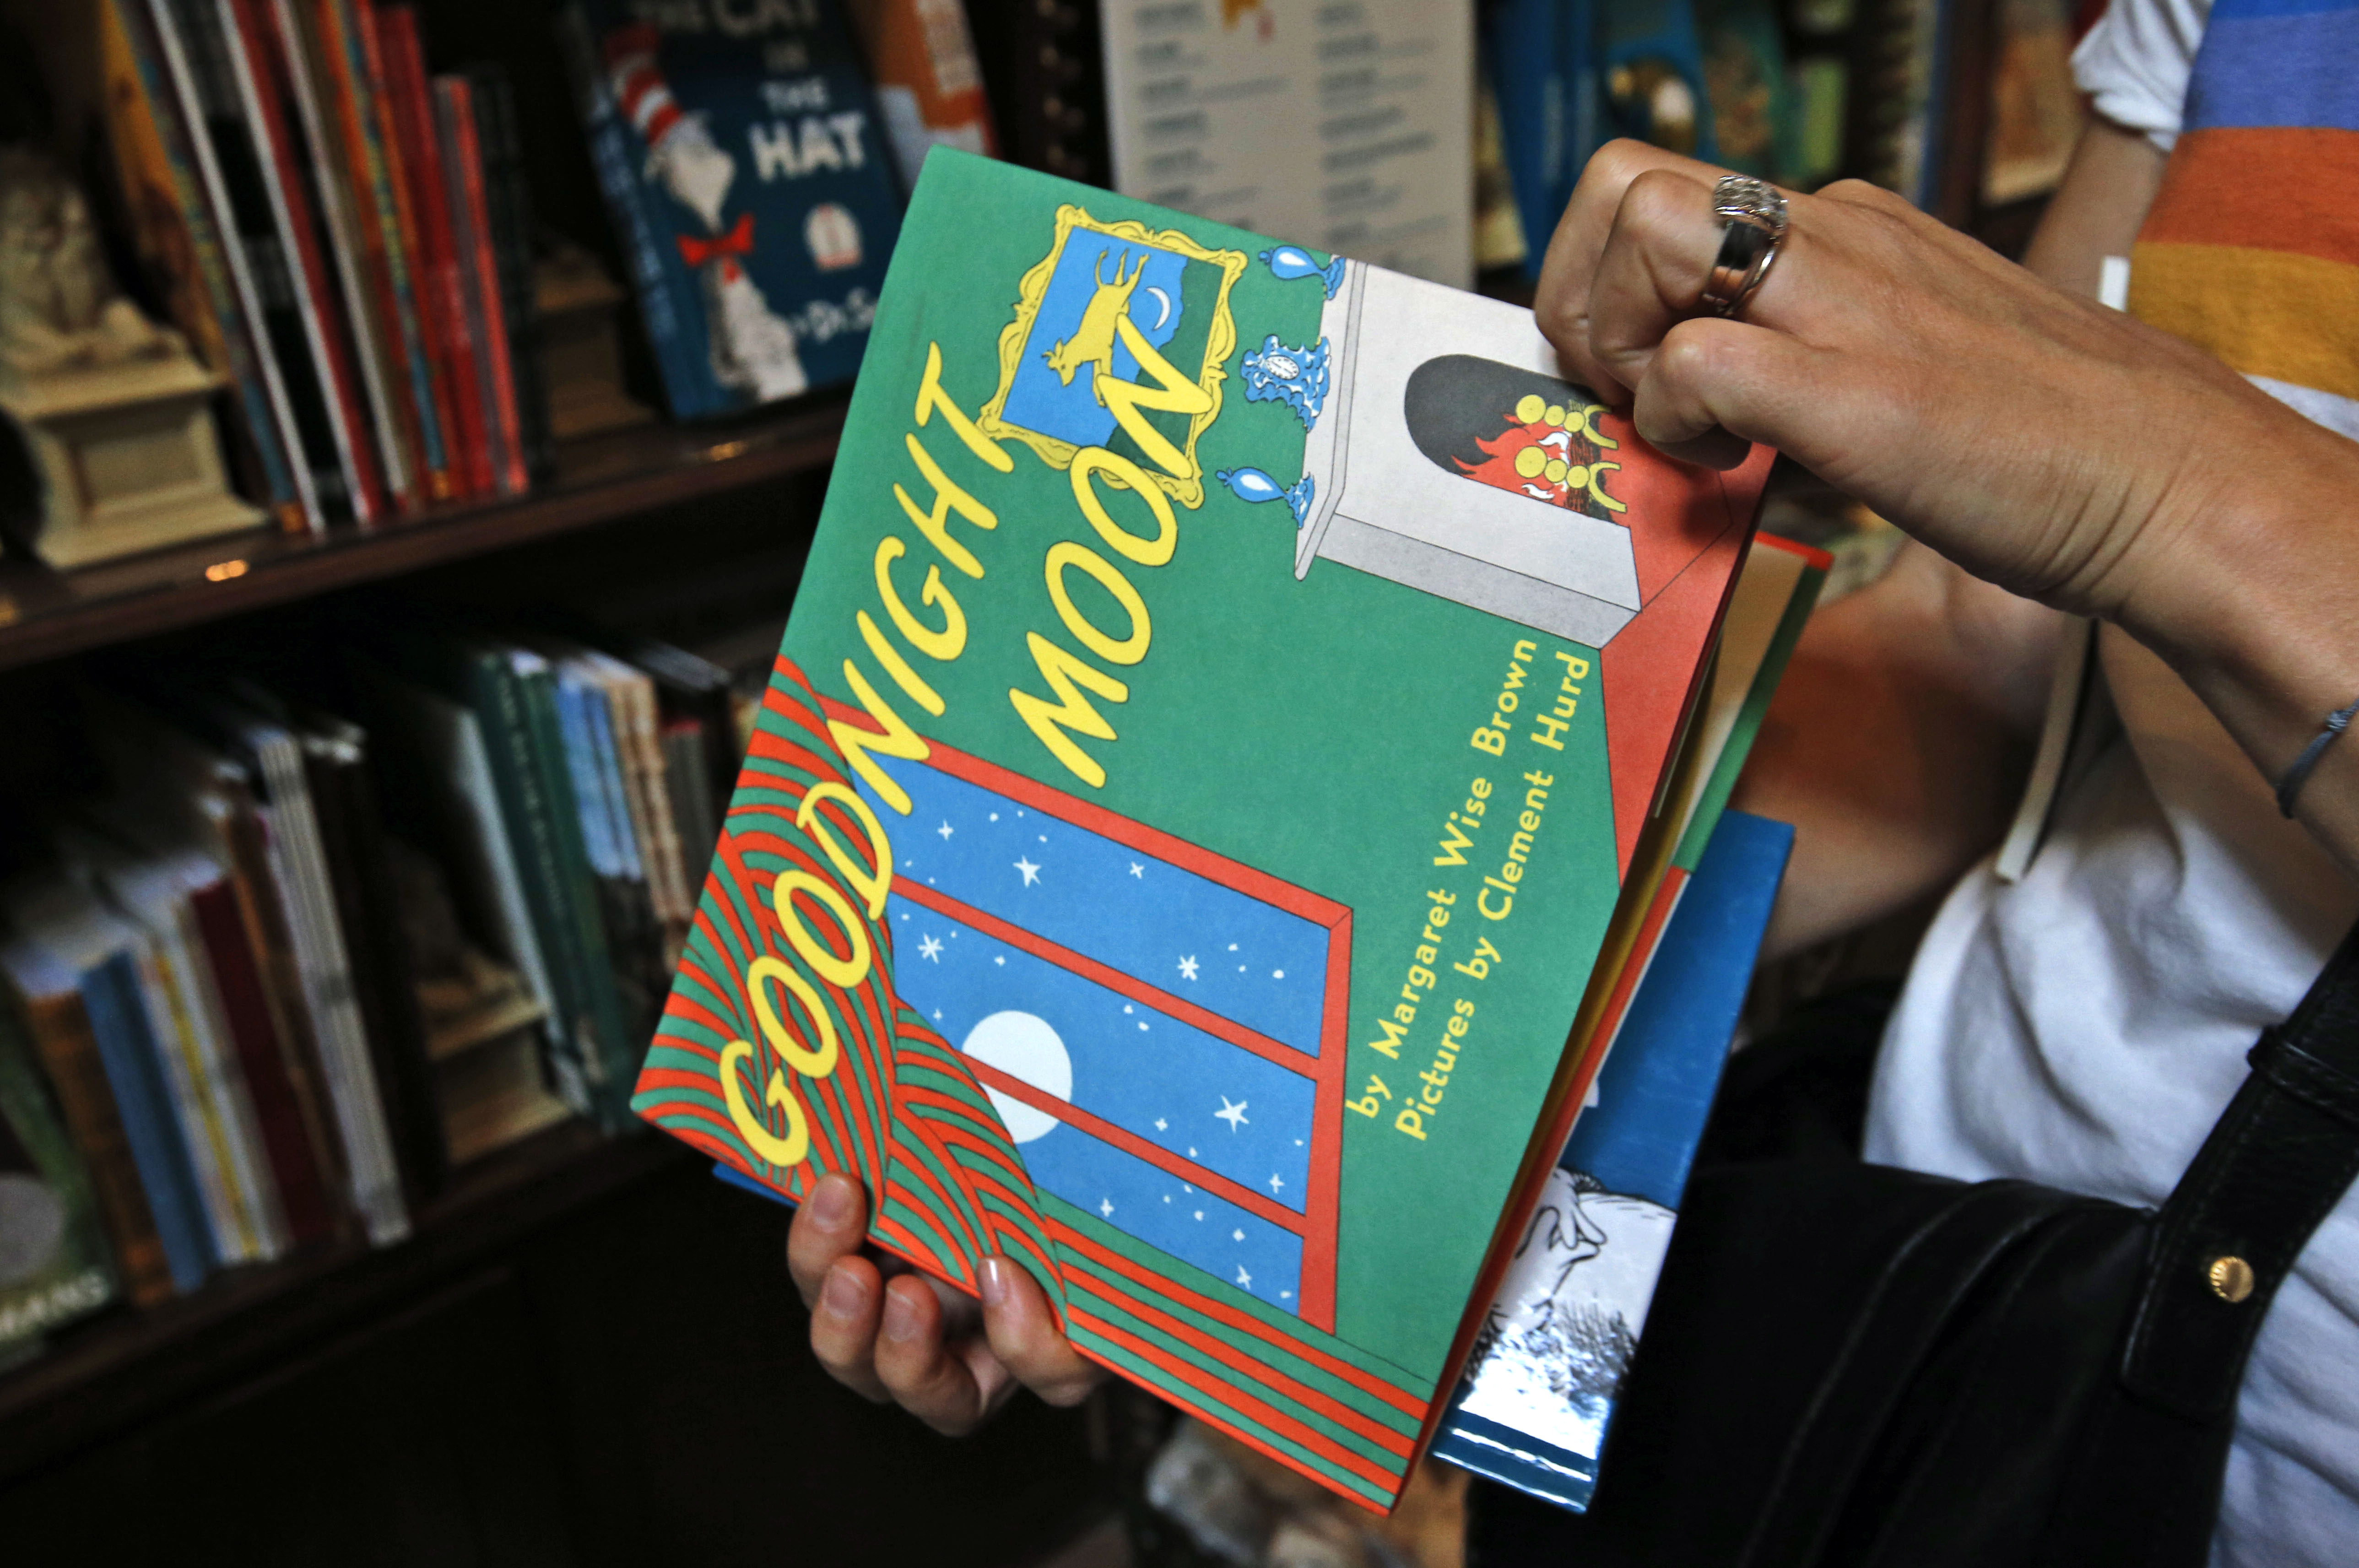 A new chapter for author of ‘Goodnight Moon’ – a book of bedtime songs